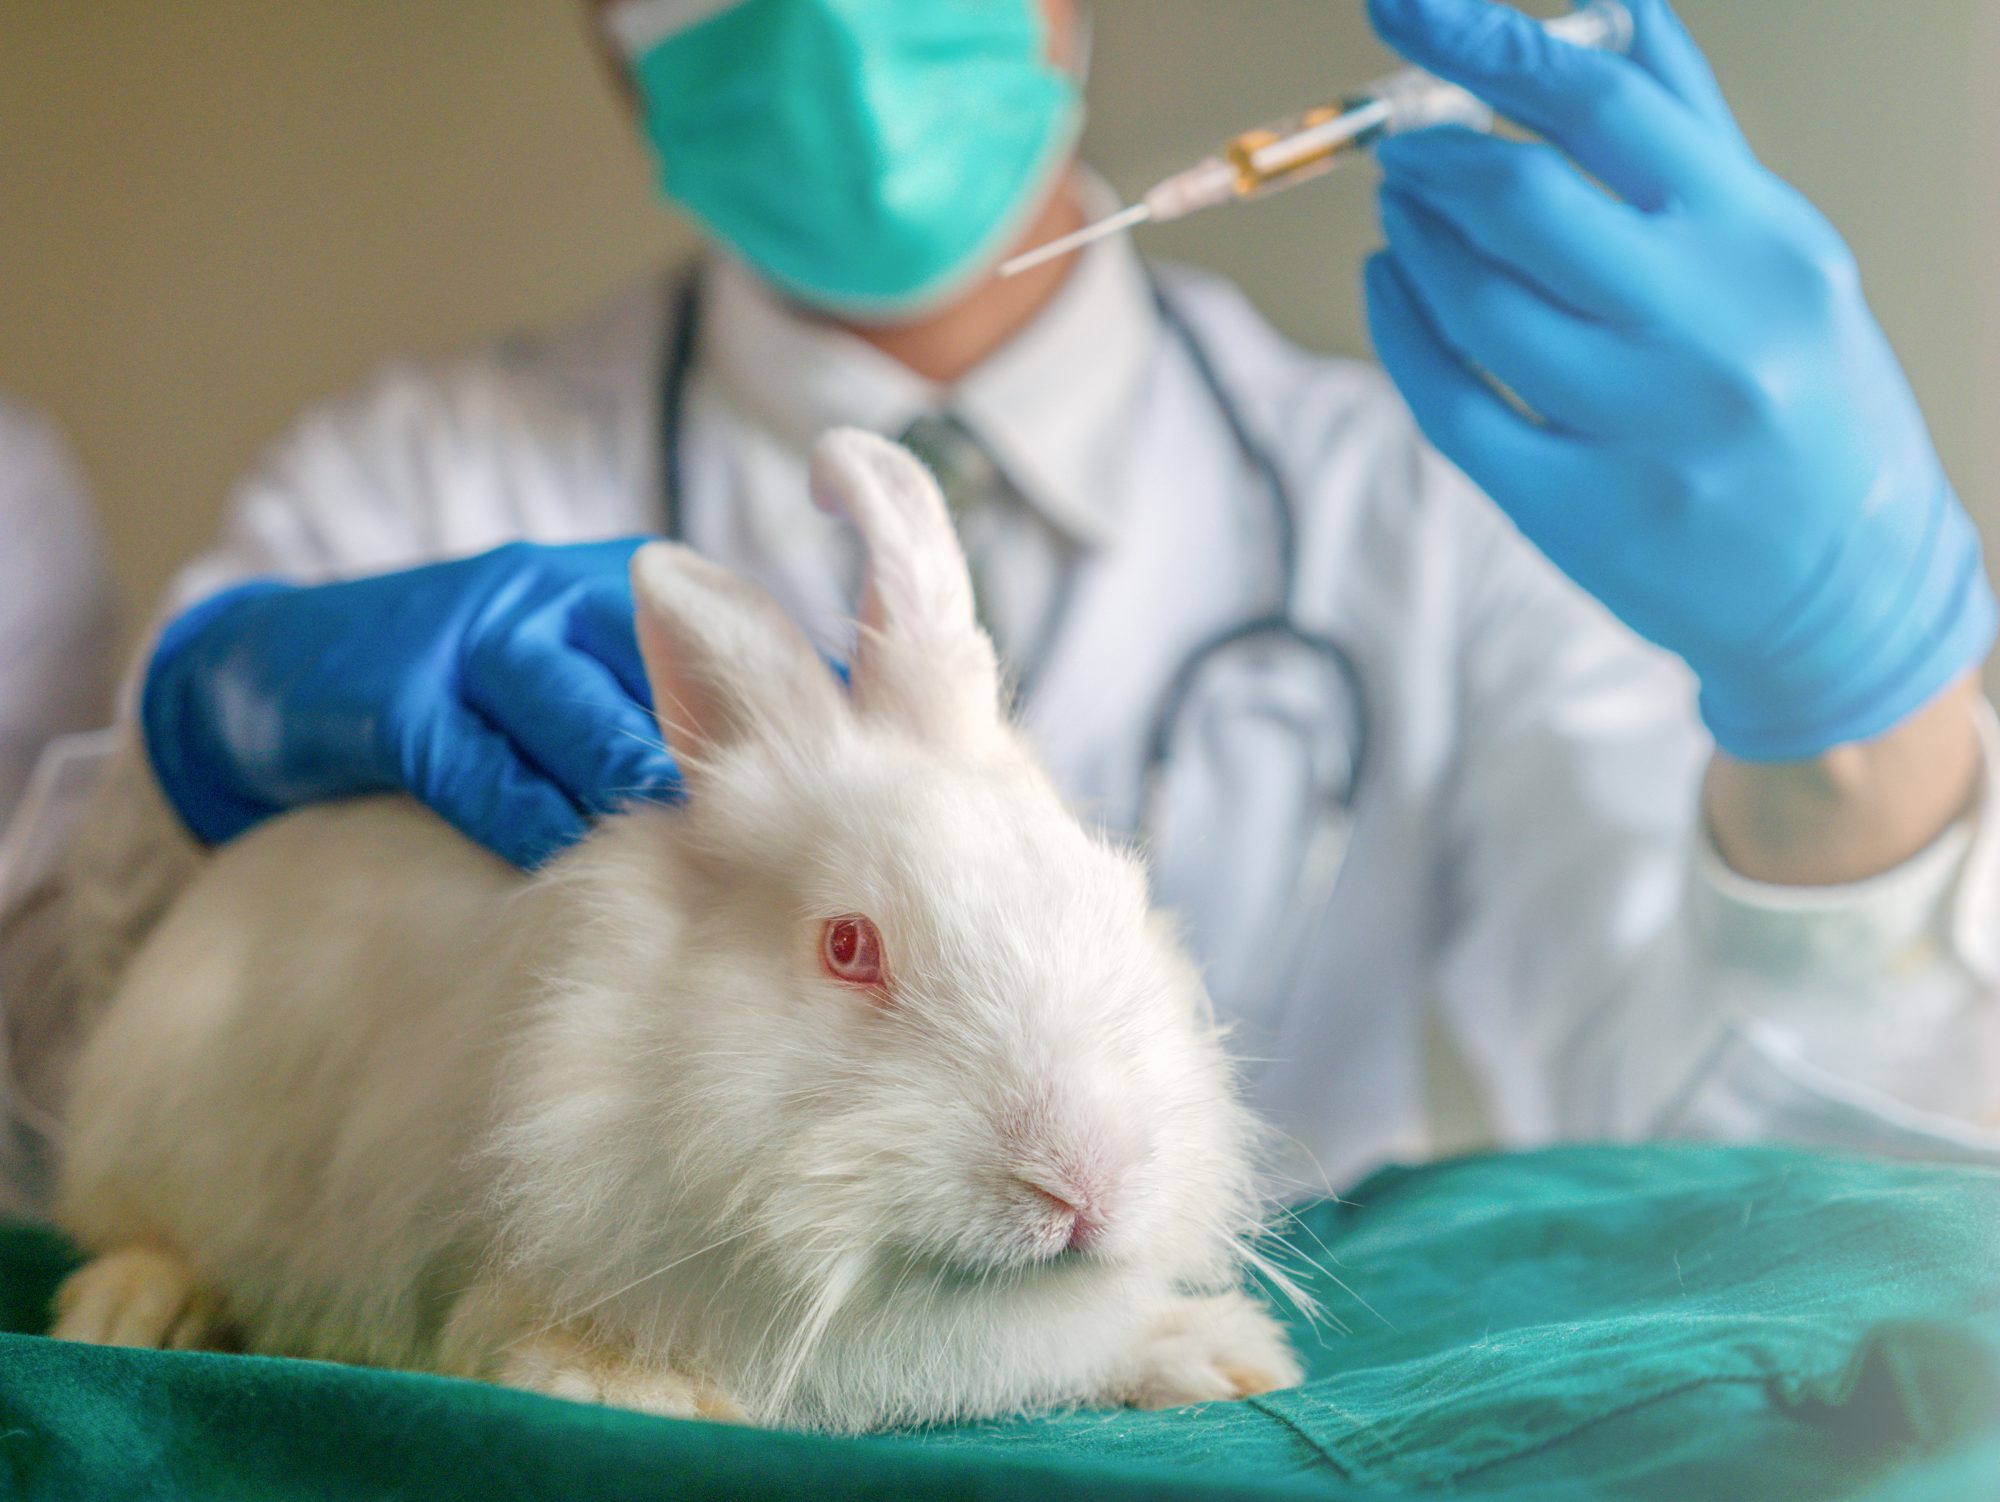 White rabbit about to be injected by scientist who is wearing white coat, mask and gloves